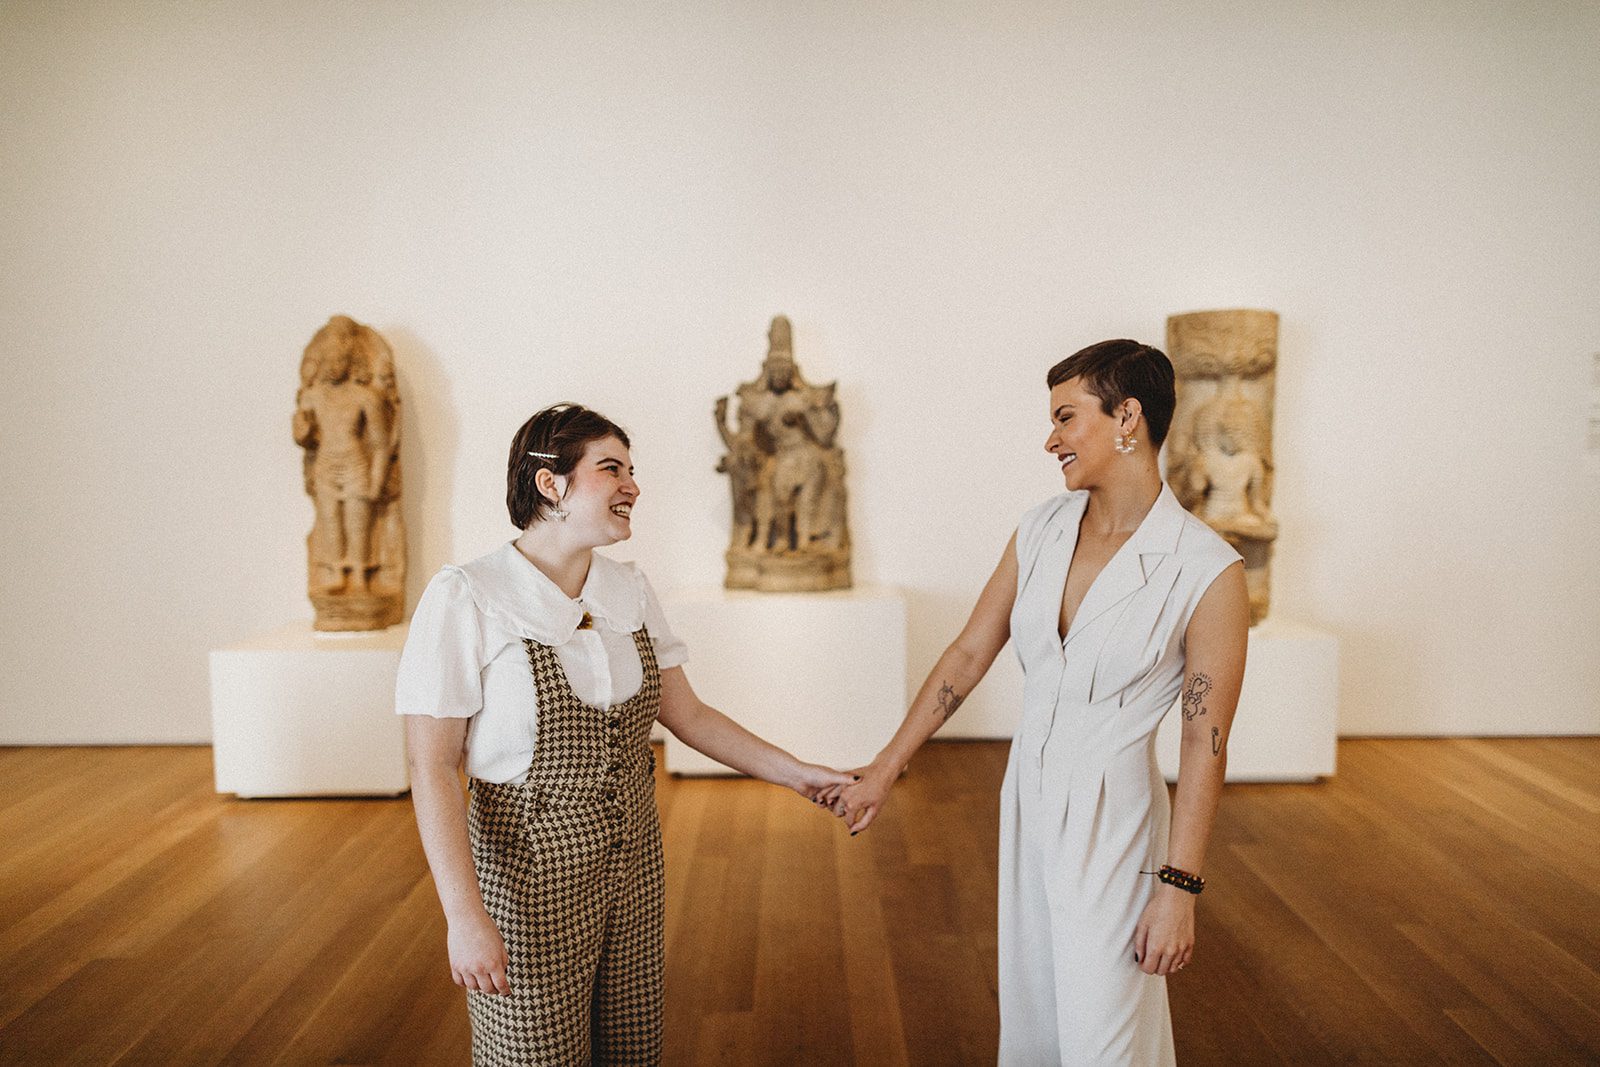 In front of an exhibit, the two outstretch their arms to hold hangs and smile at each other.